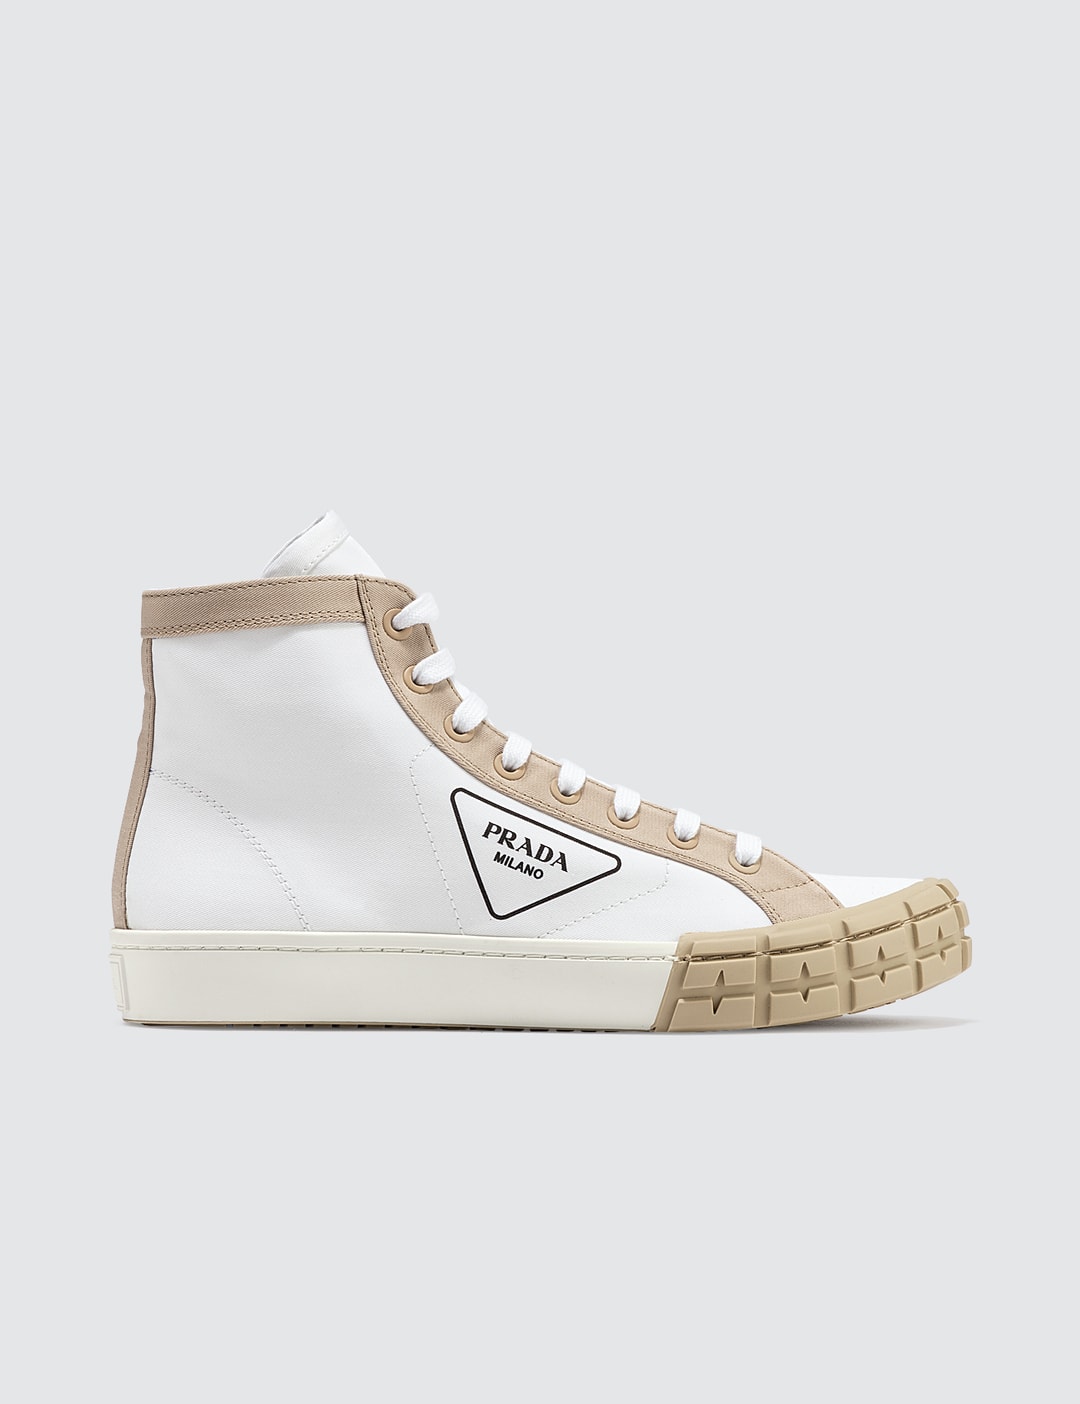 Prada - Gabardine Bicolor Sneaker | HBX - Globally Curated Fashion and  Lifestyle by Hypebeast